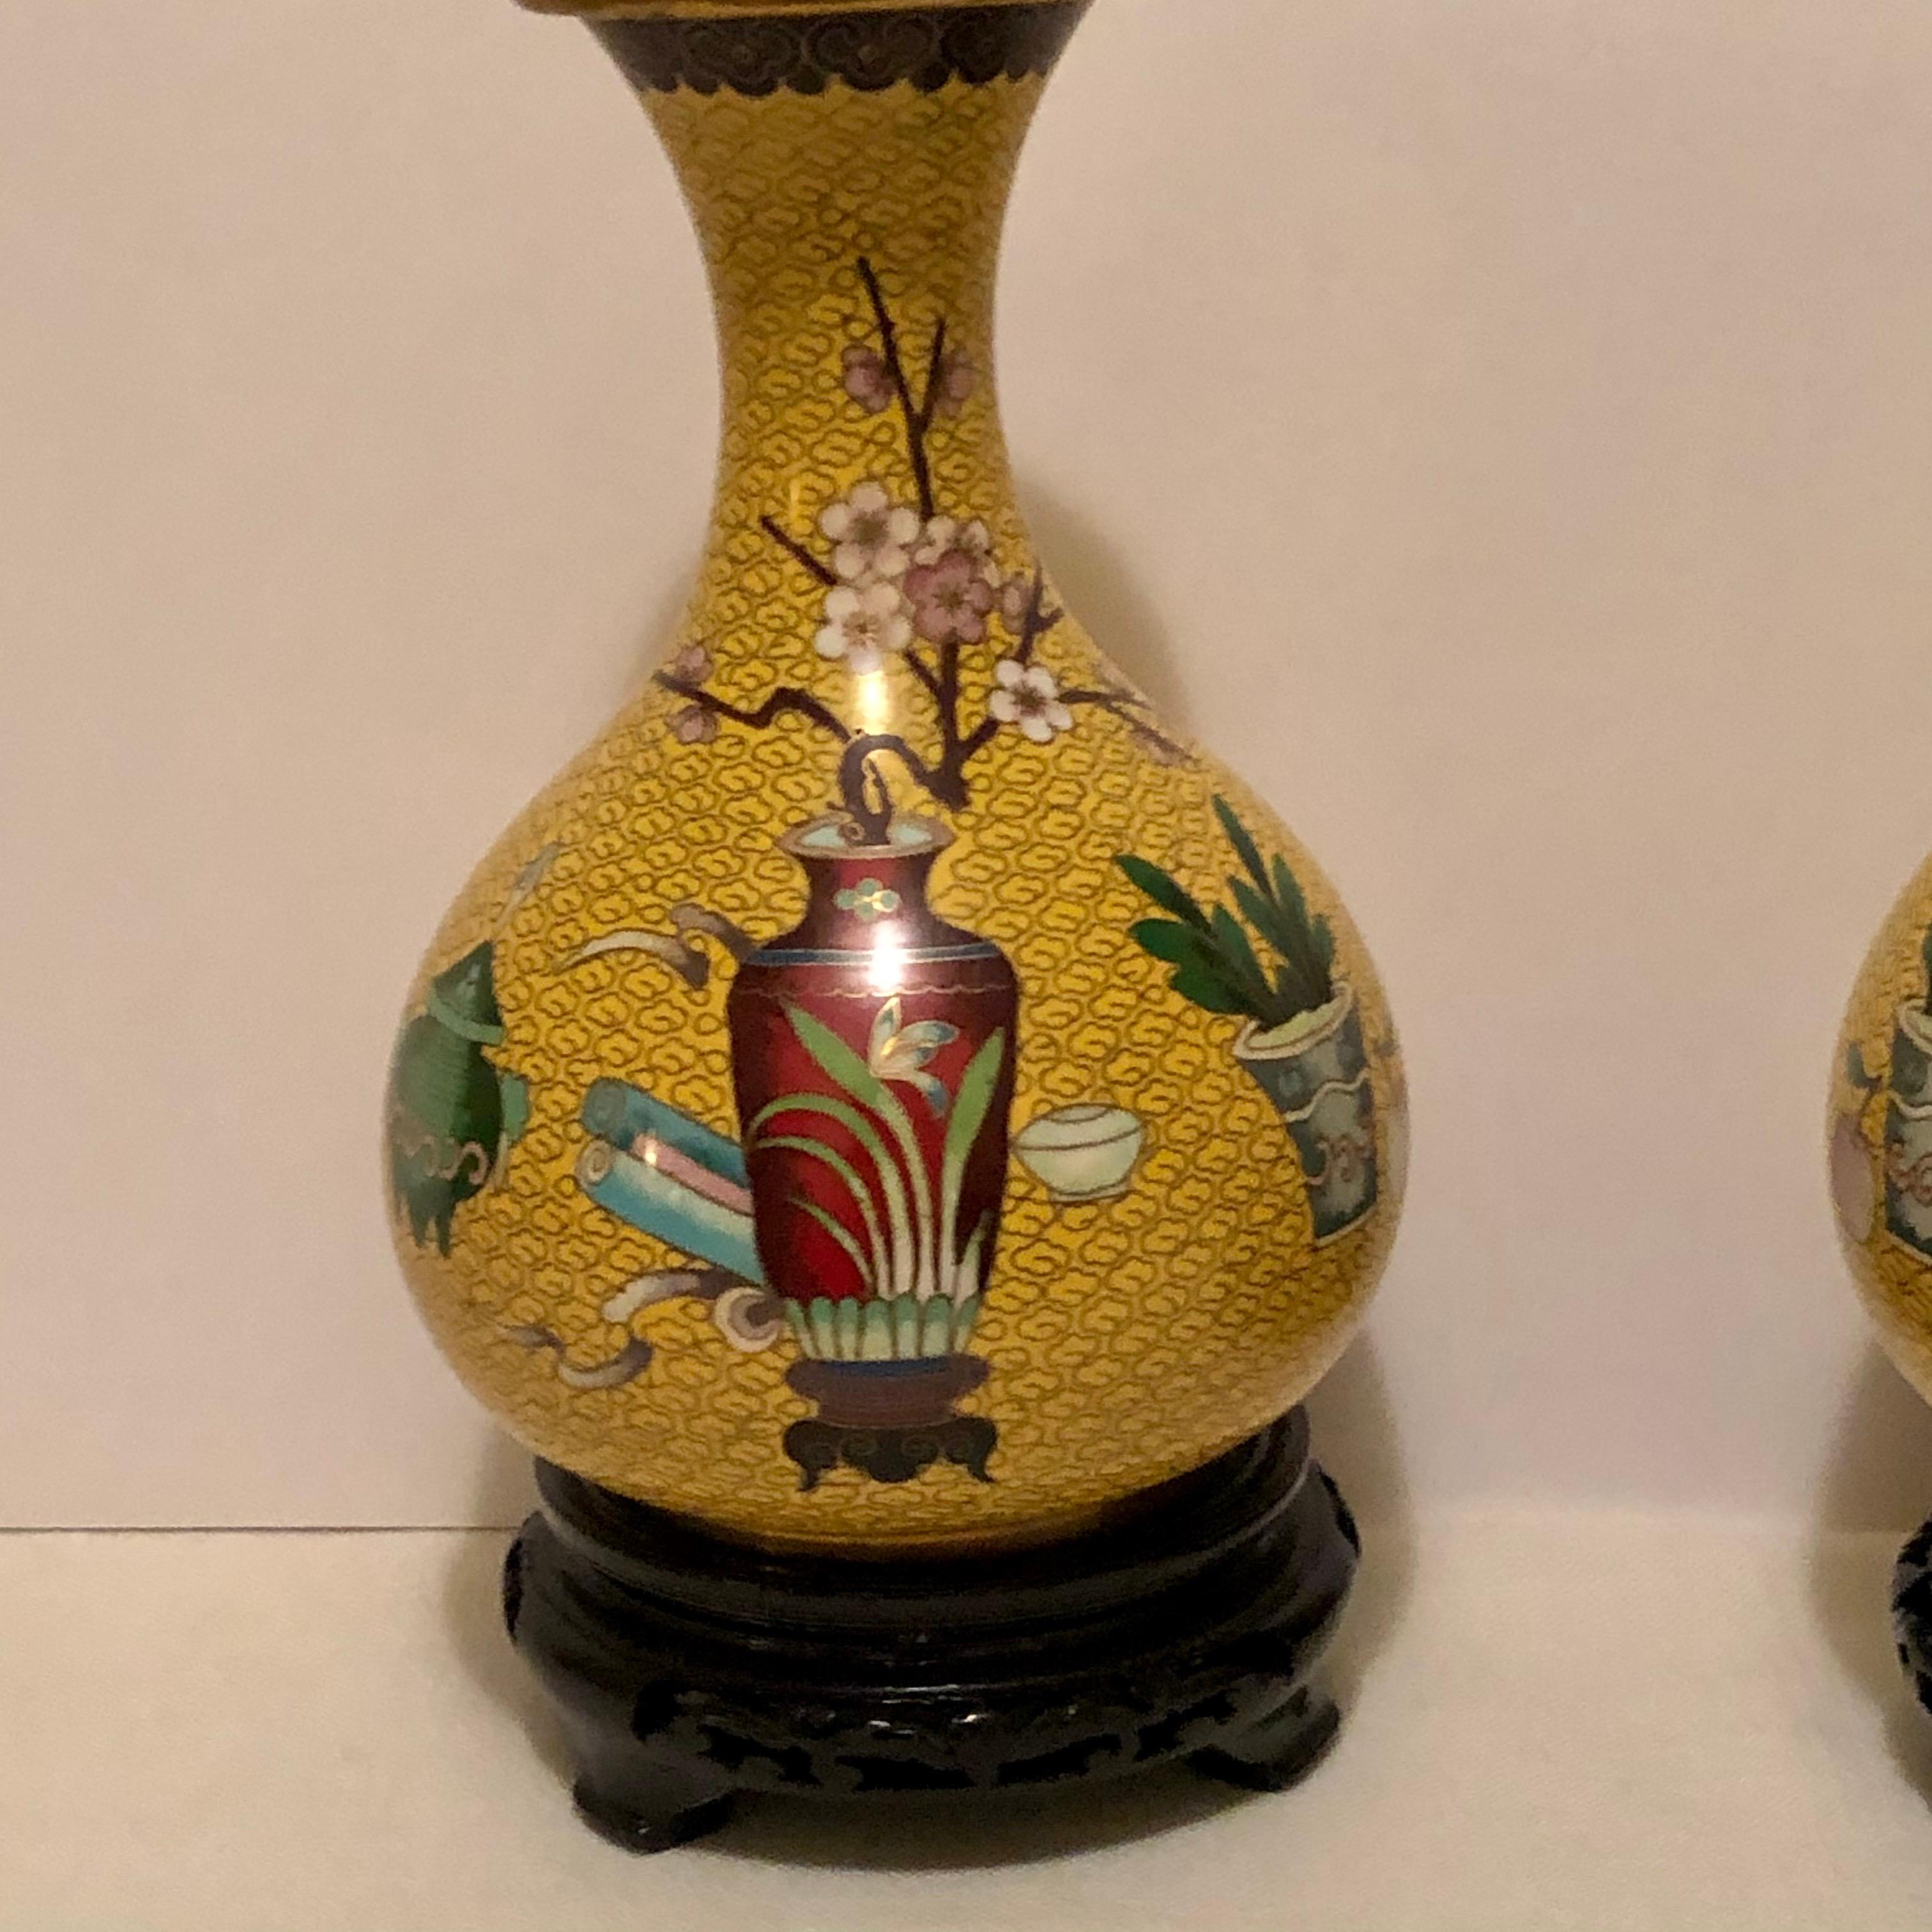 Pair of Yellow Chinese Cloisonné Vases with a Chinese Red Vase & Prunus Flowers 1